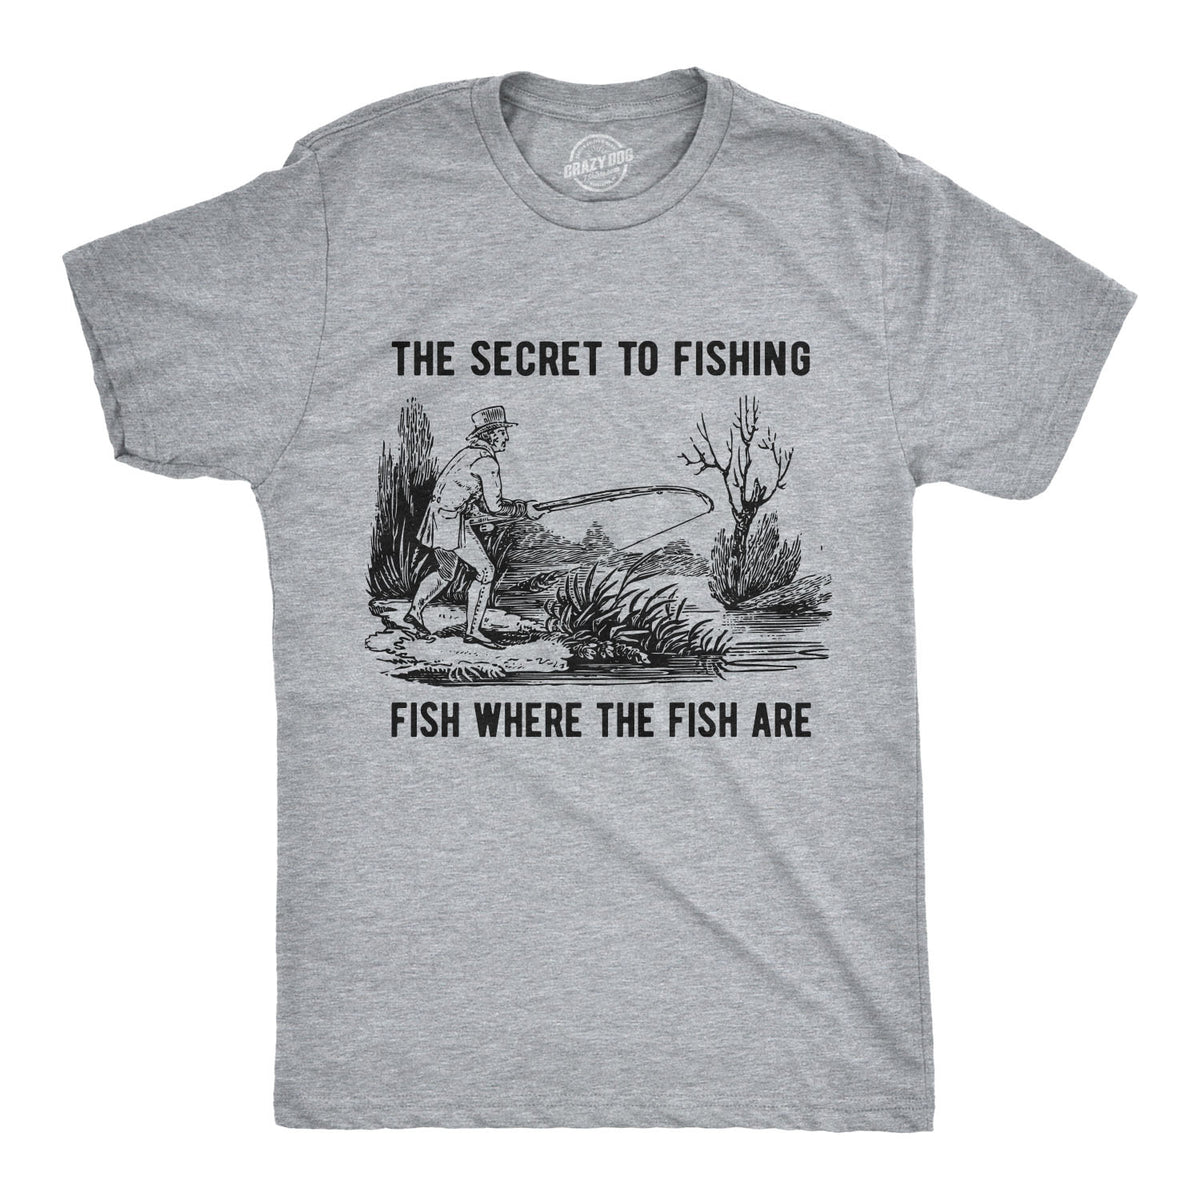 I am not a Fish but I can still be caught - Fishing T-Shirt